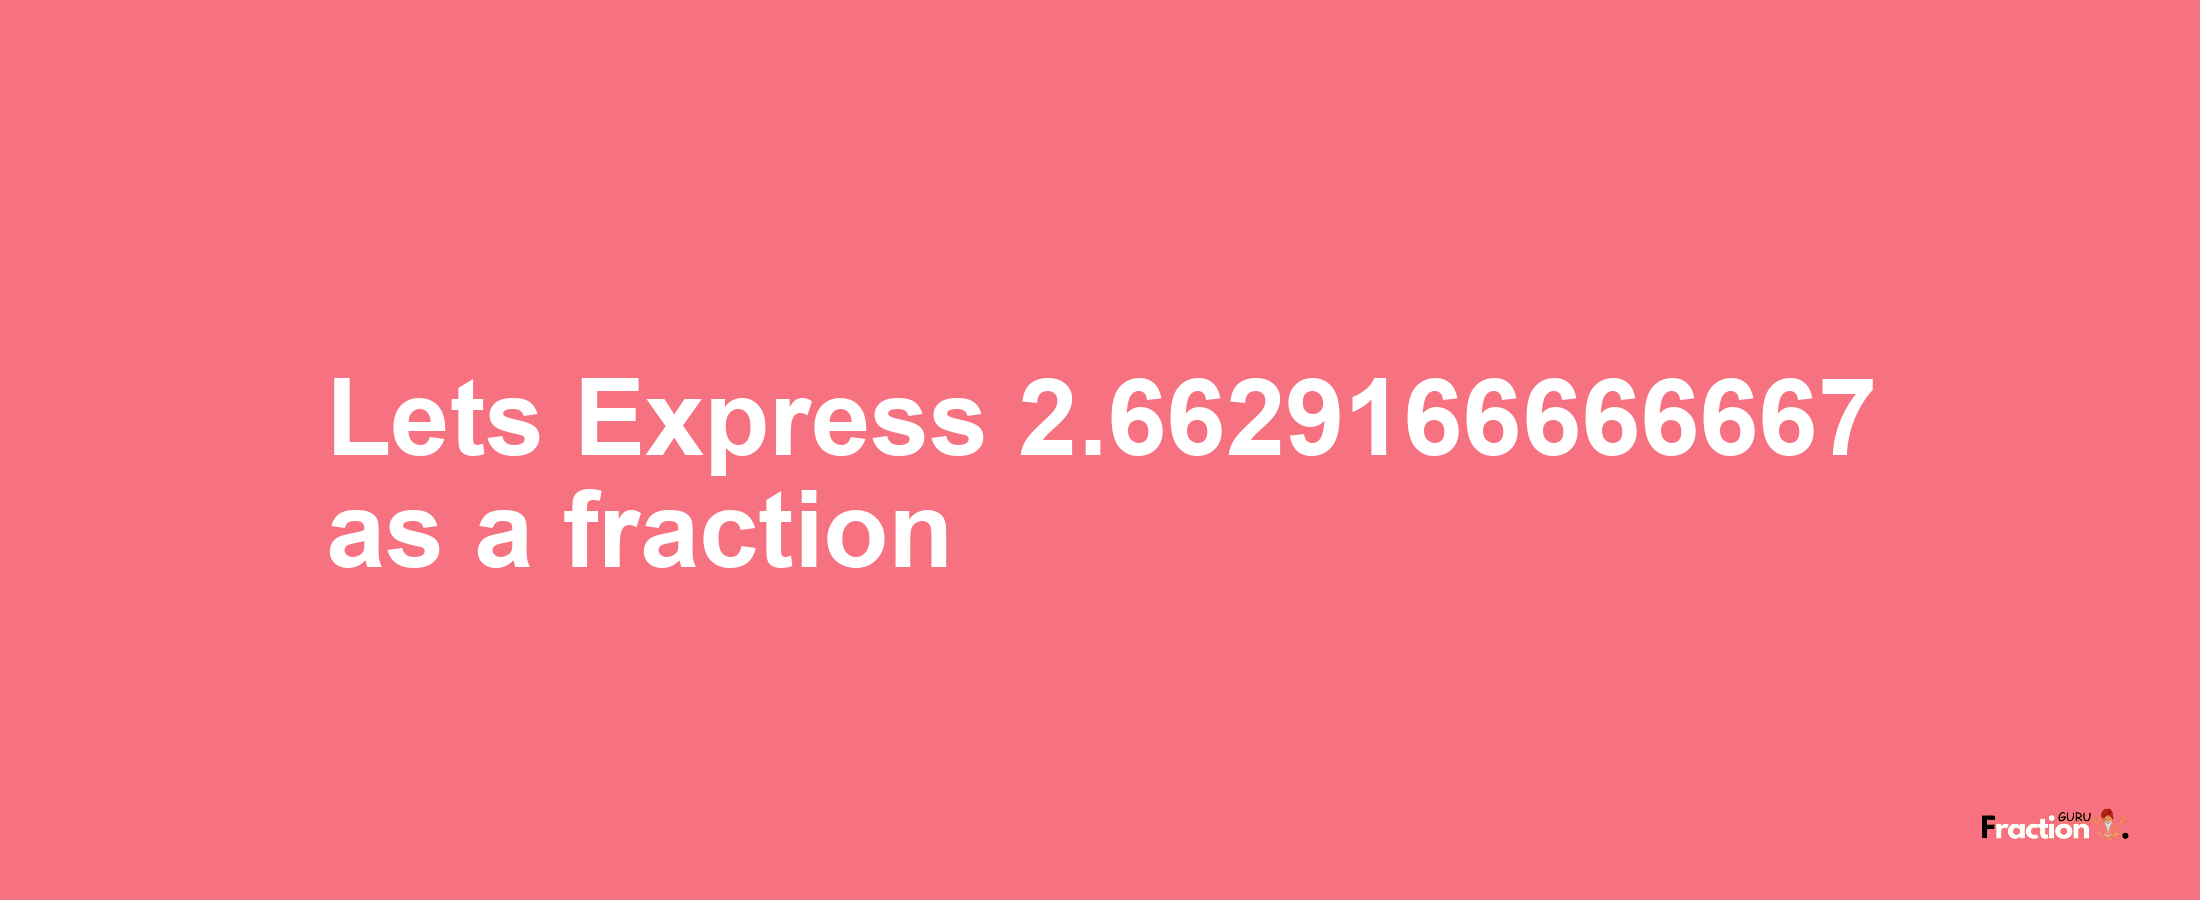 Lets Express 2.6629166666667 as afraction